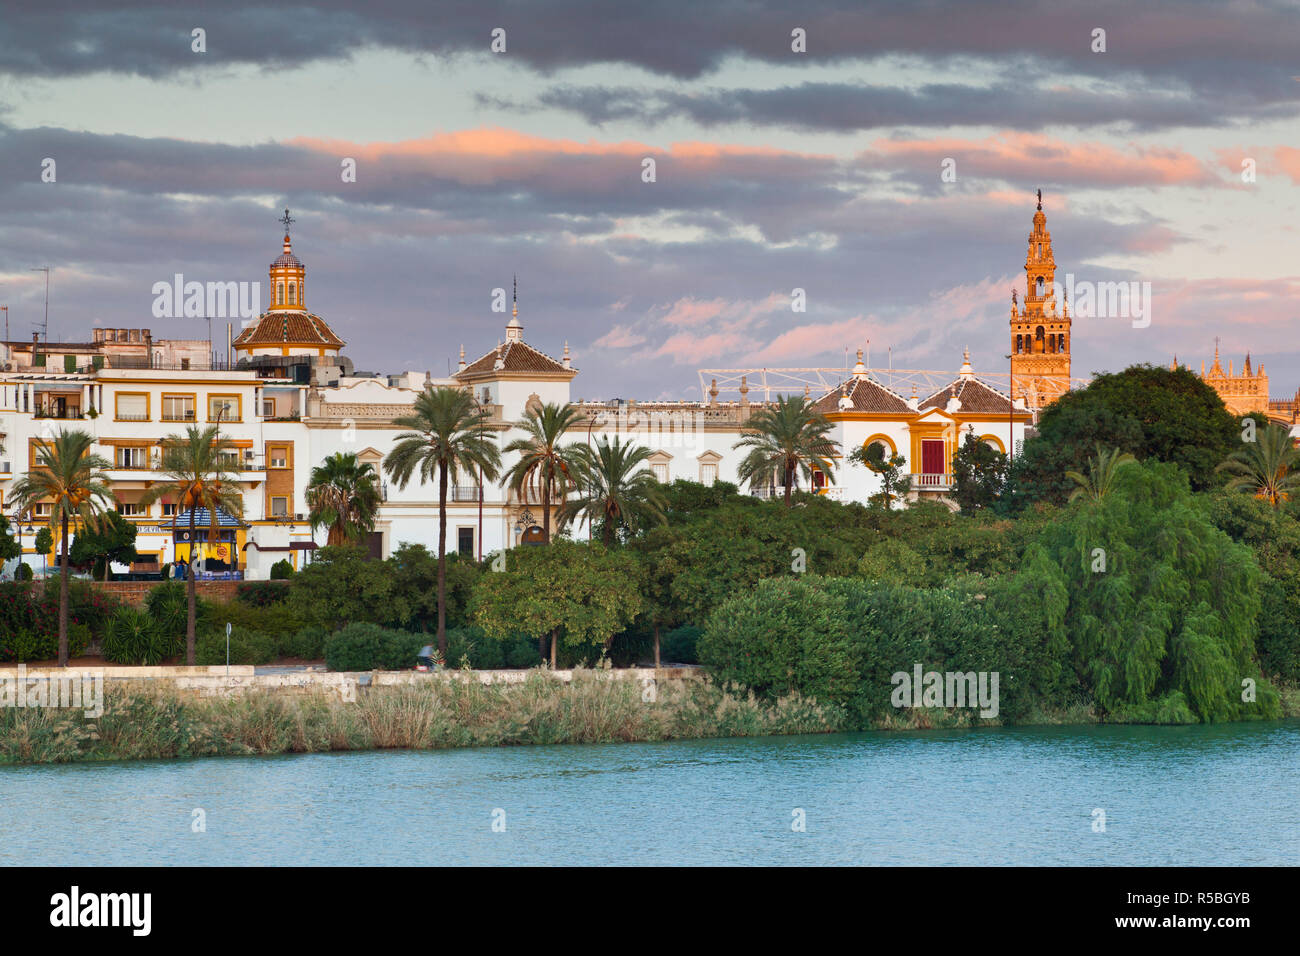 Spain, Andalucia Region, Seville Province, Seville, Waterfront view along the Rio Guadalquivir River Stock Photo